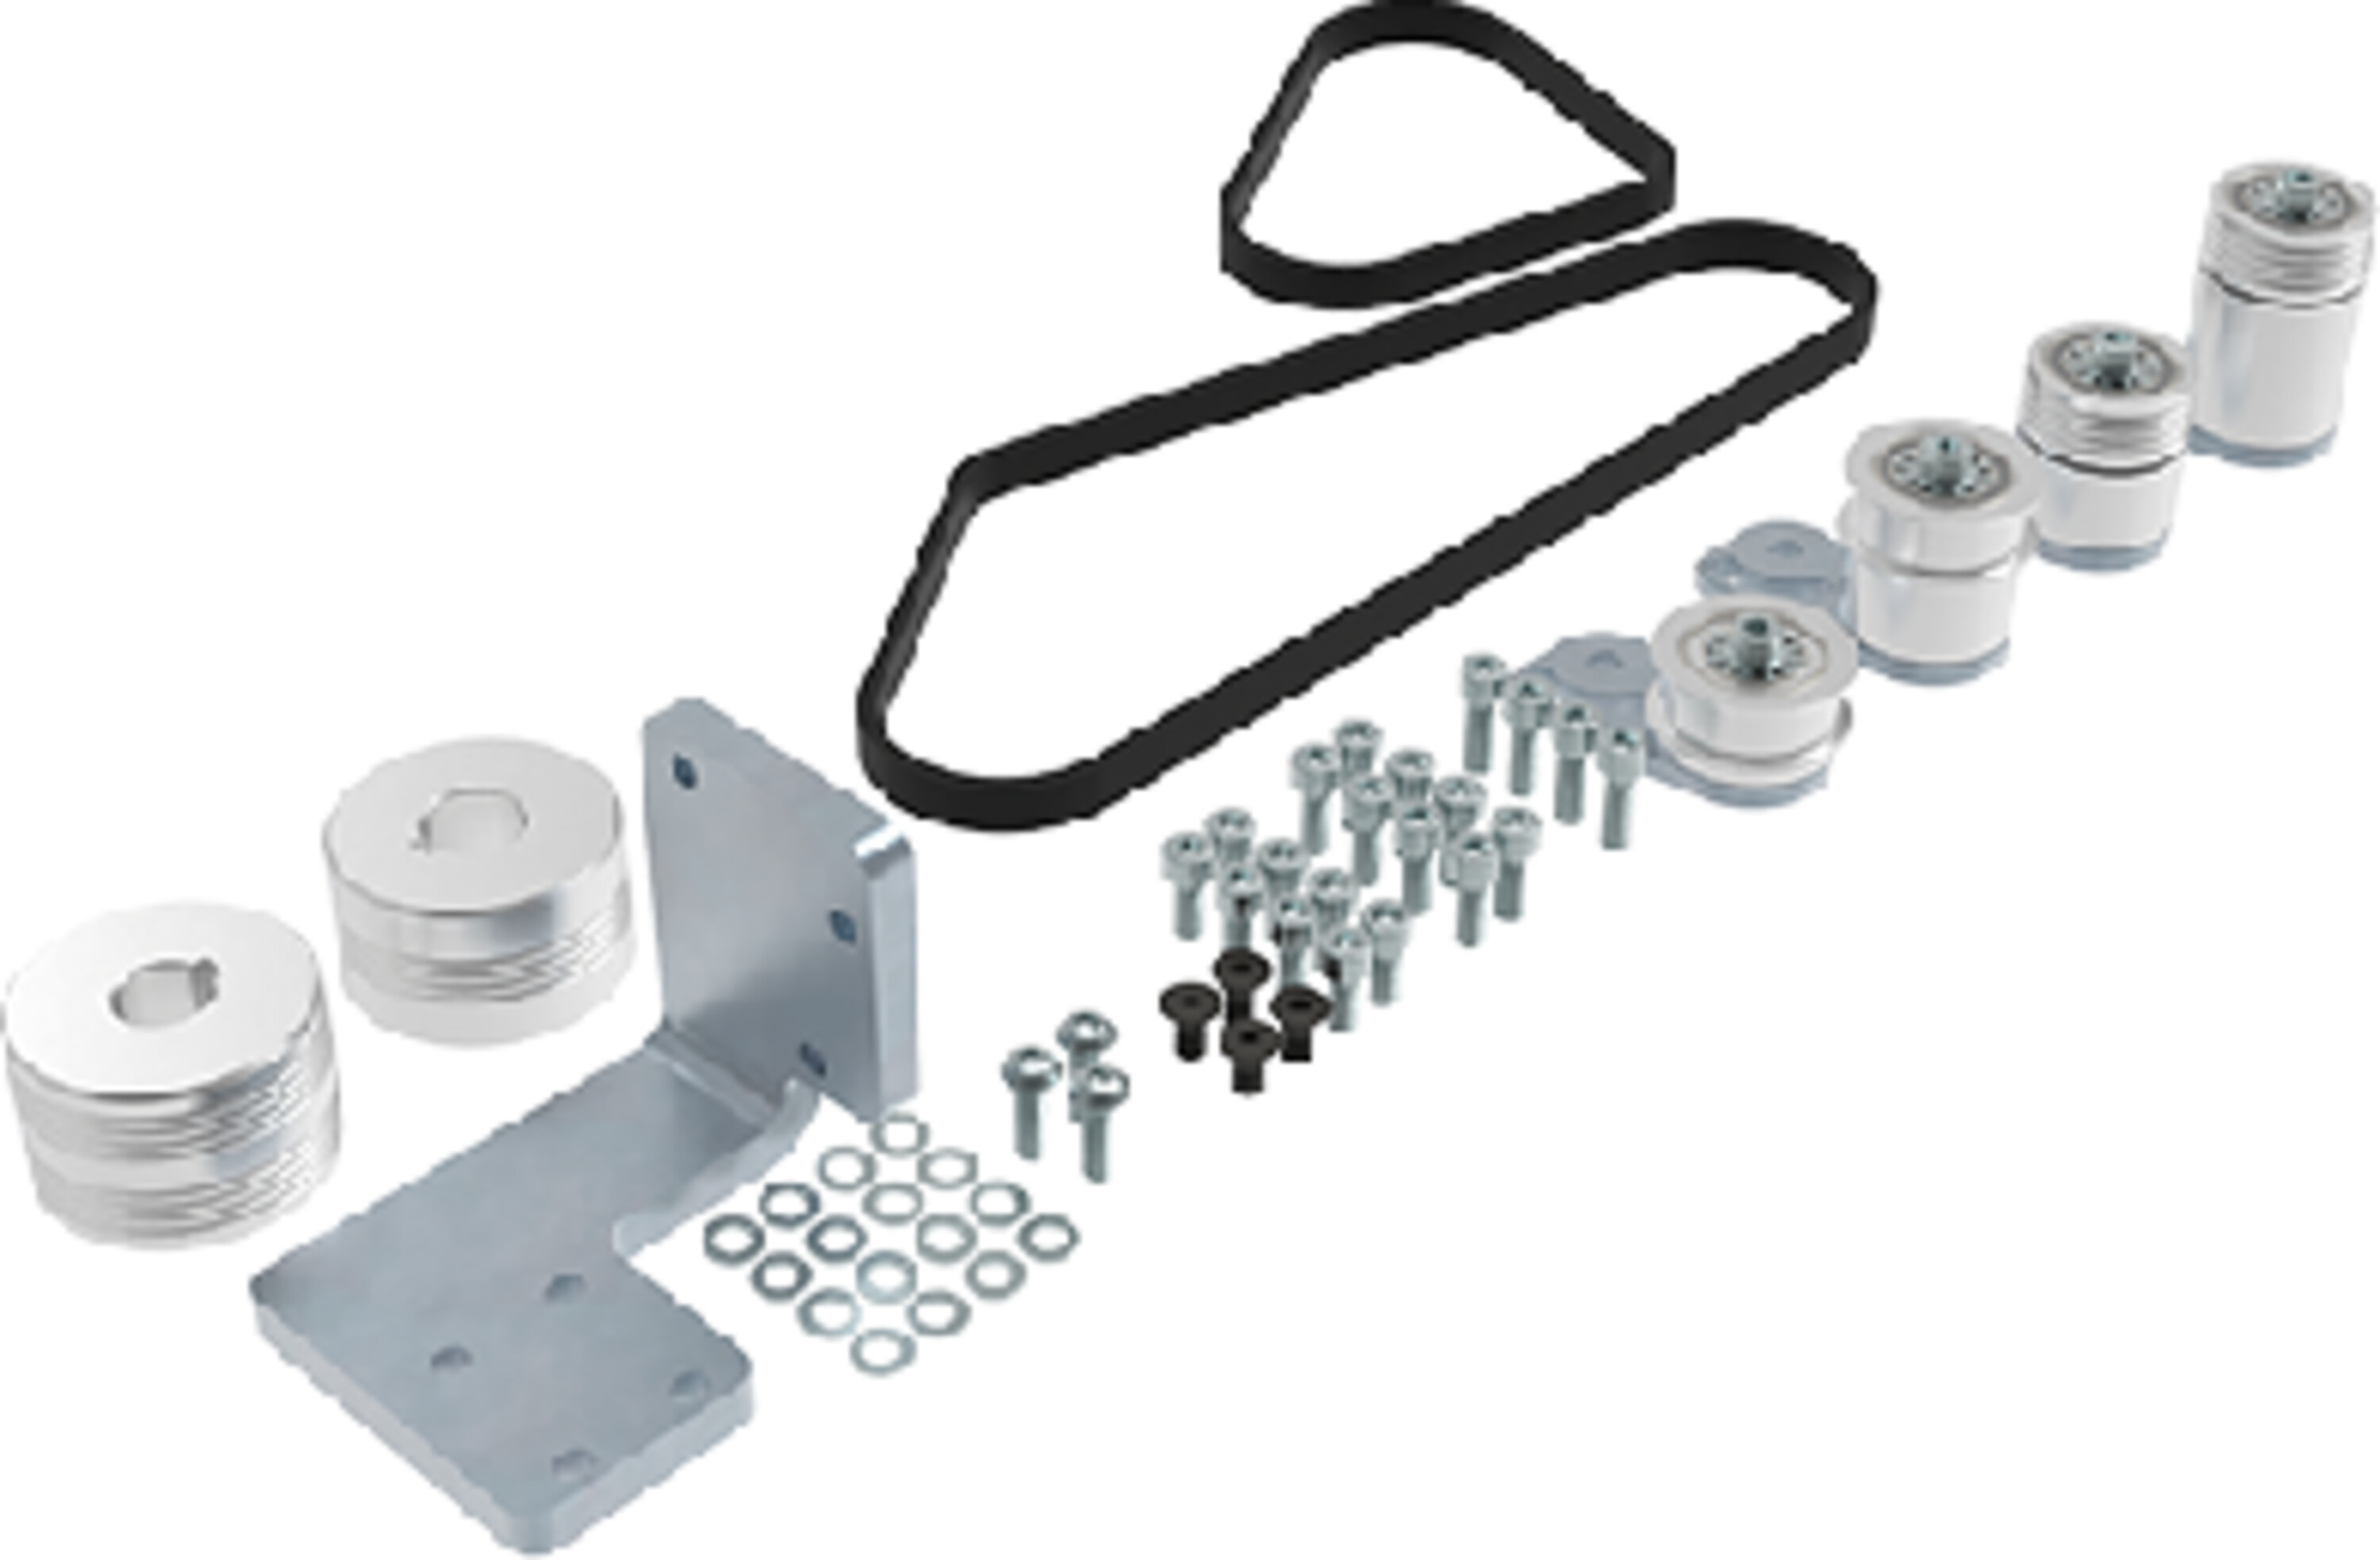 Retrofit Kit Small Pulley Drives for Single / Double Line Diverters SLD / DLD